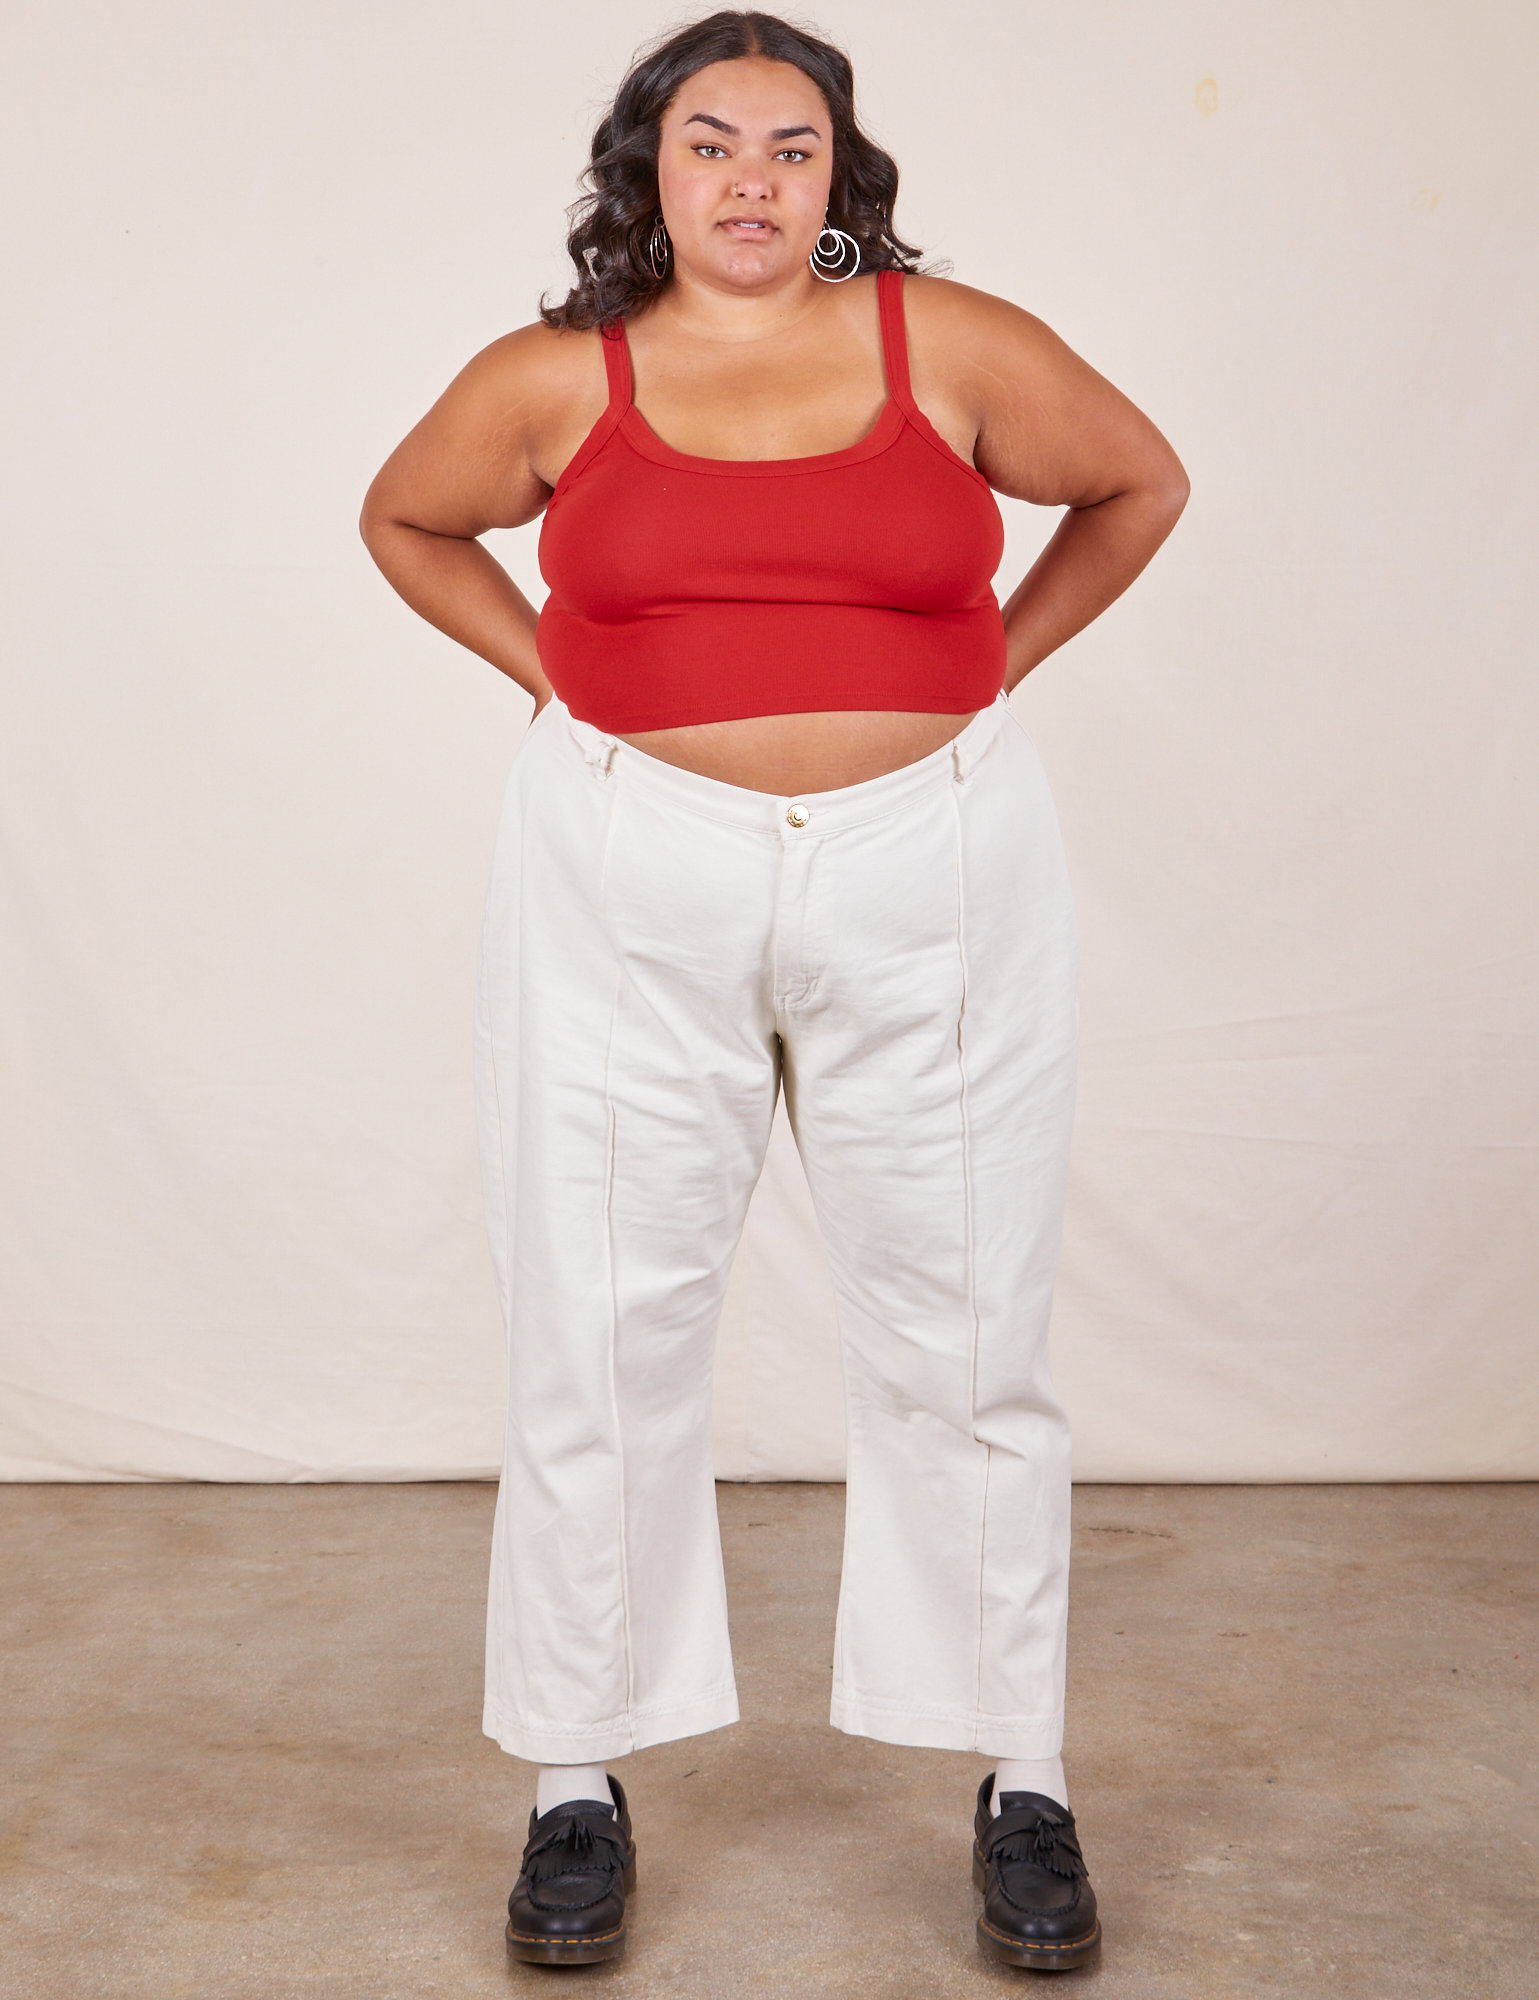 Alicia is wearing Cropped Cami in Mustang Red and vintage off-white Western Pants